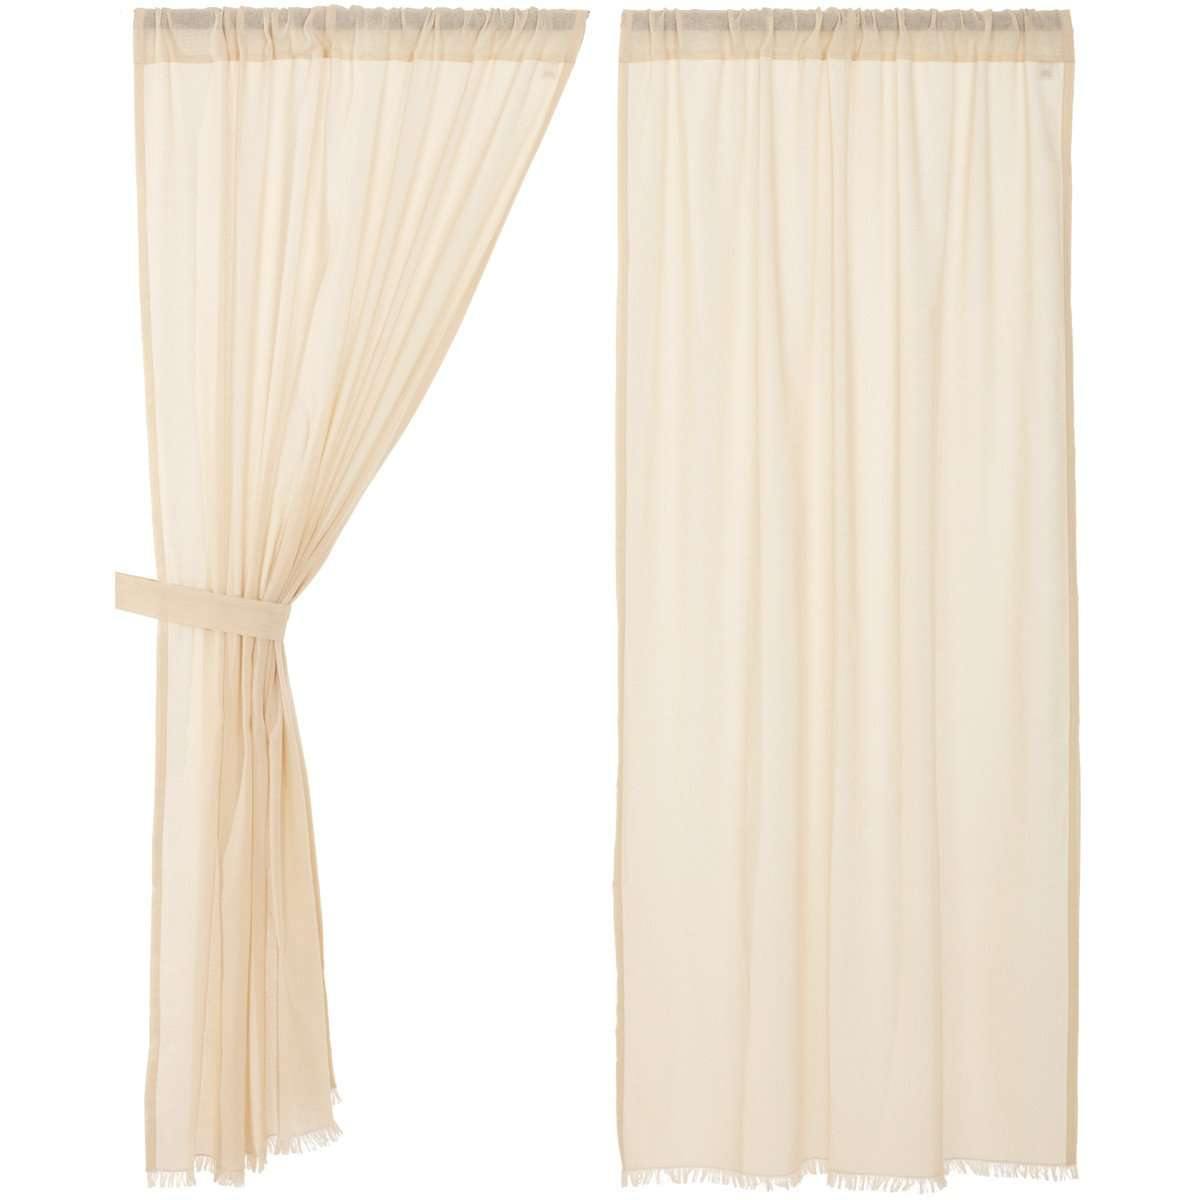 Tobacco Cloth Natural Short Panel Curtain Fringed Set of 2 63x36 VHC Brands - The Fox Decor